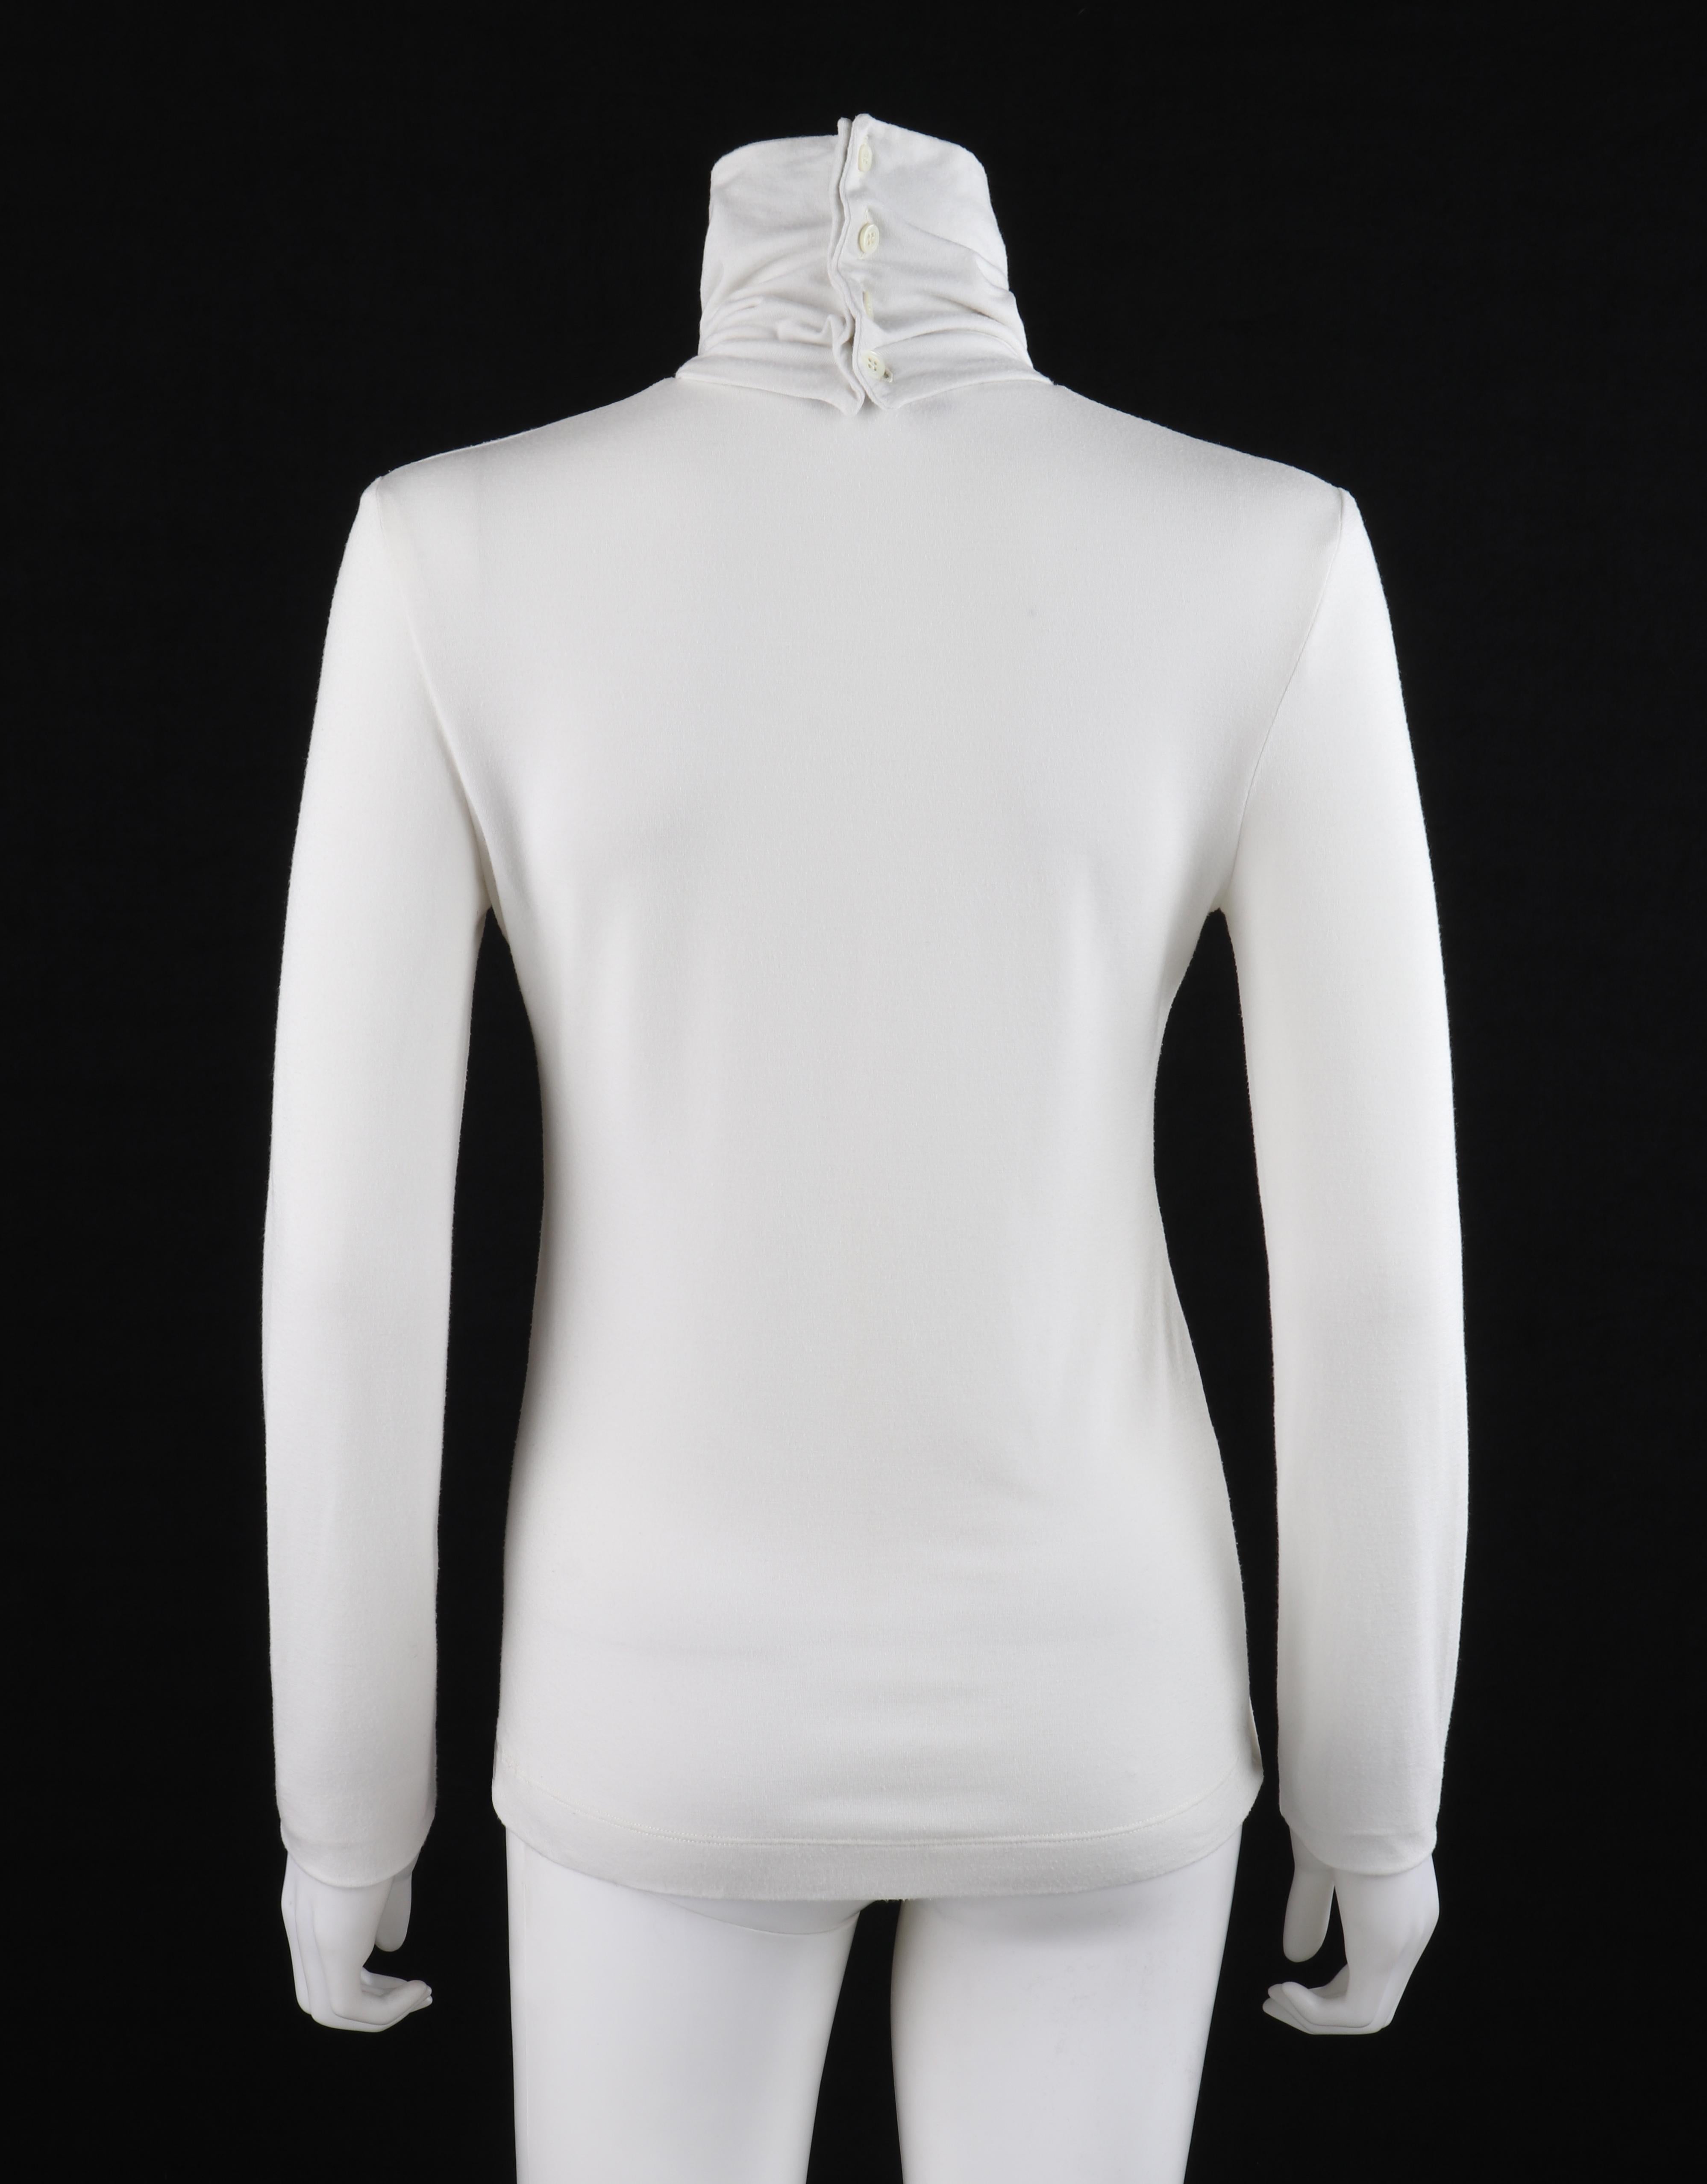 Women's ALEXANDER McQUEEN S/S 2000 “Eye” White Convertible Twisted Front High Neck Top For Sale